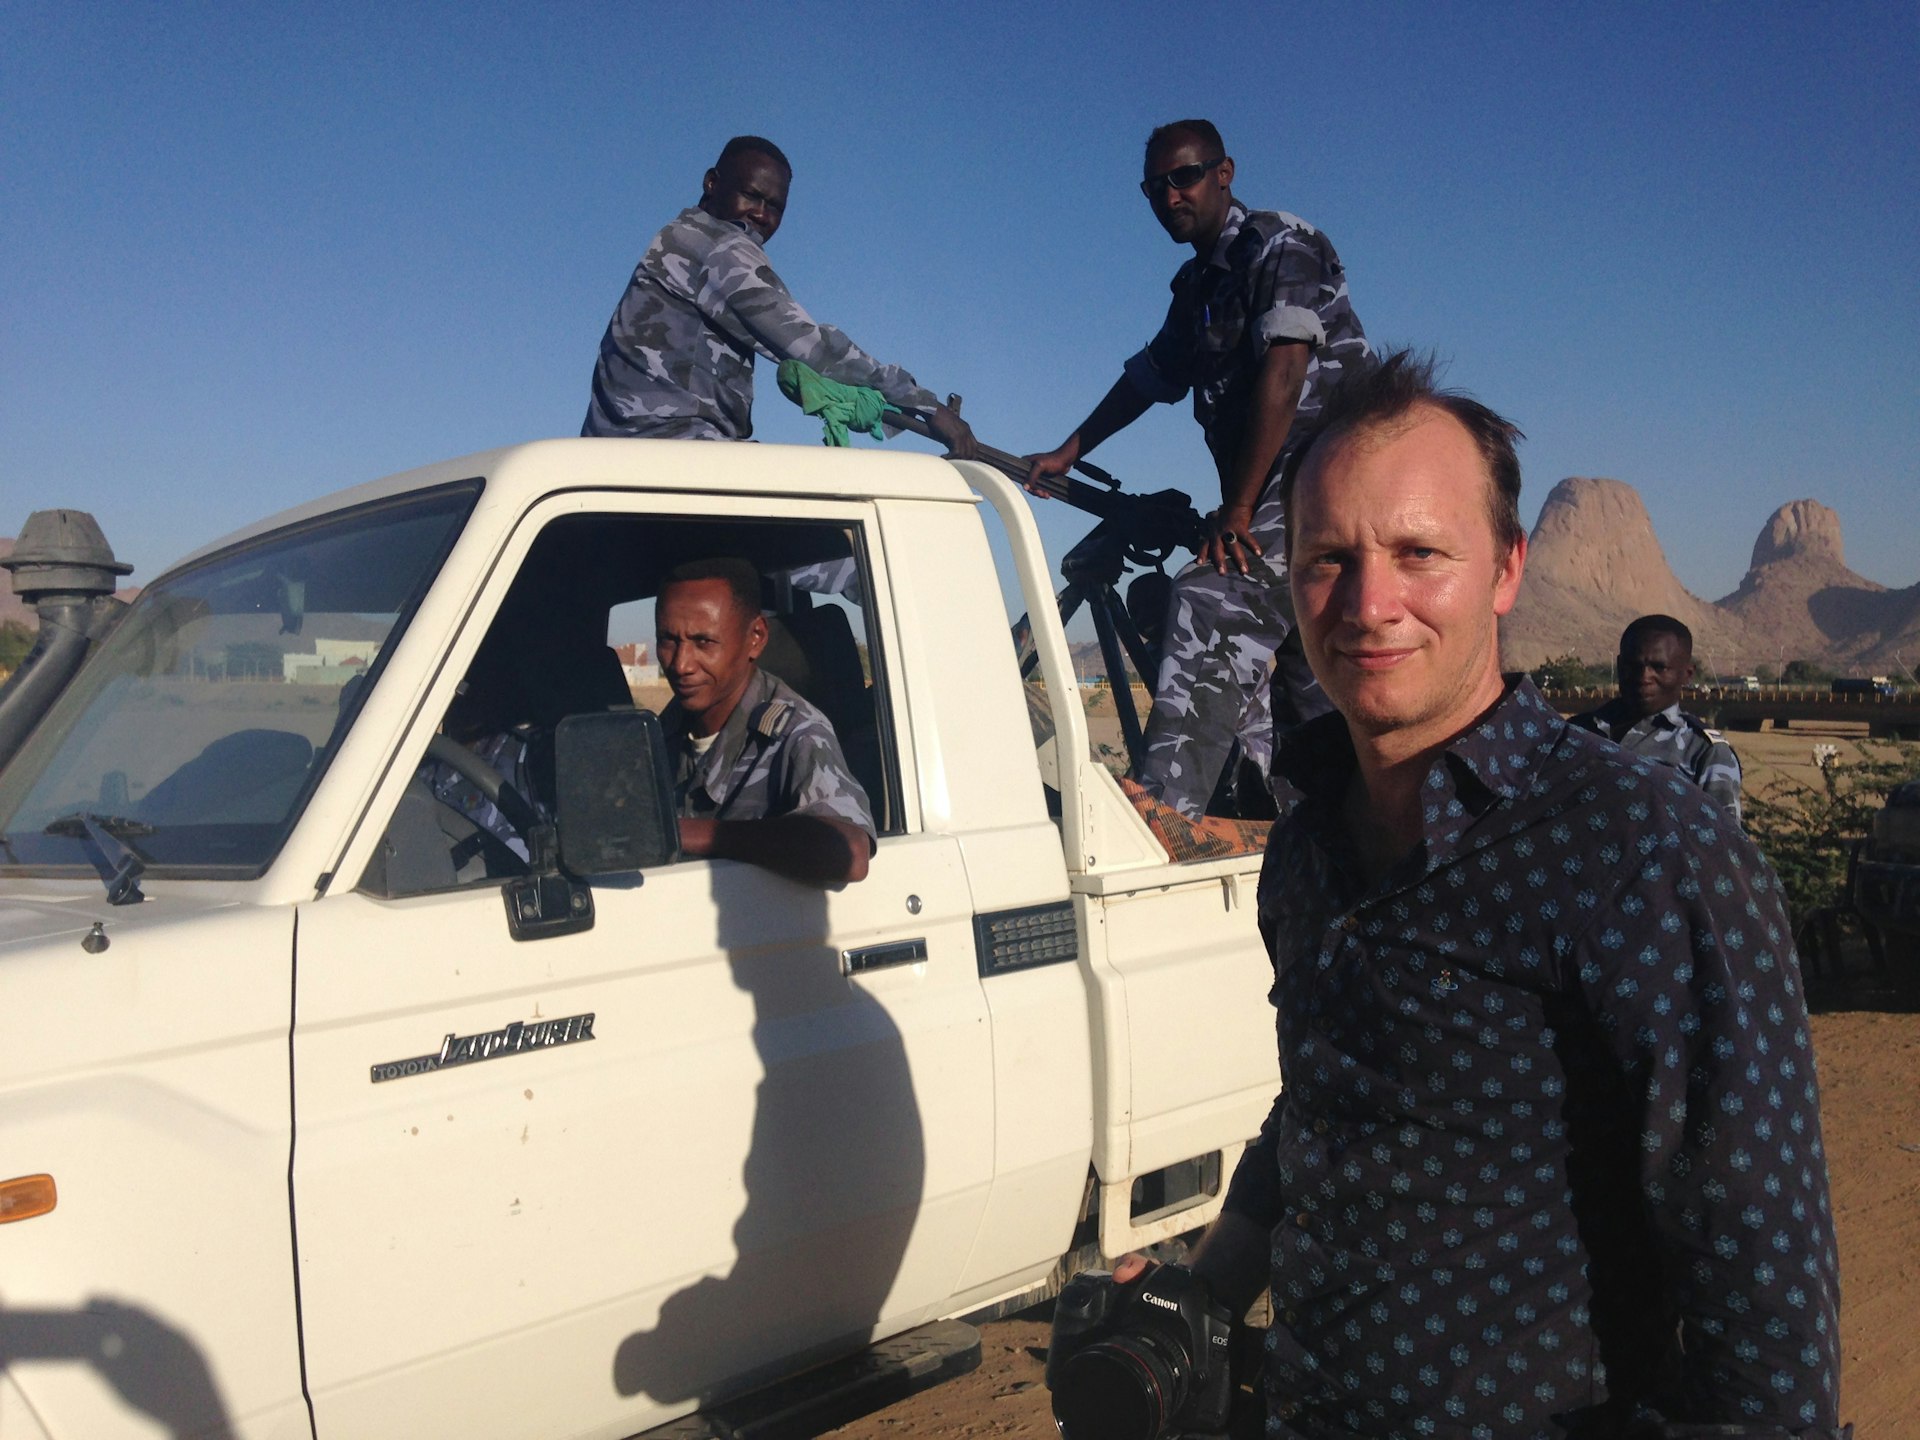 Paul and the Sudanese patrol